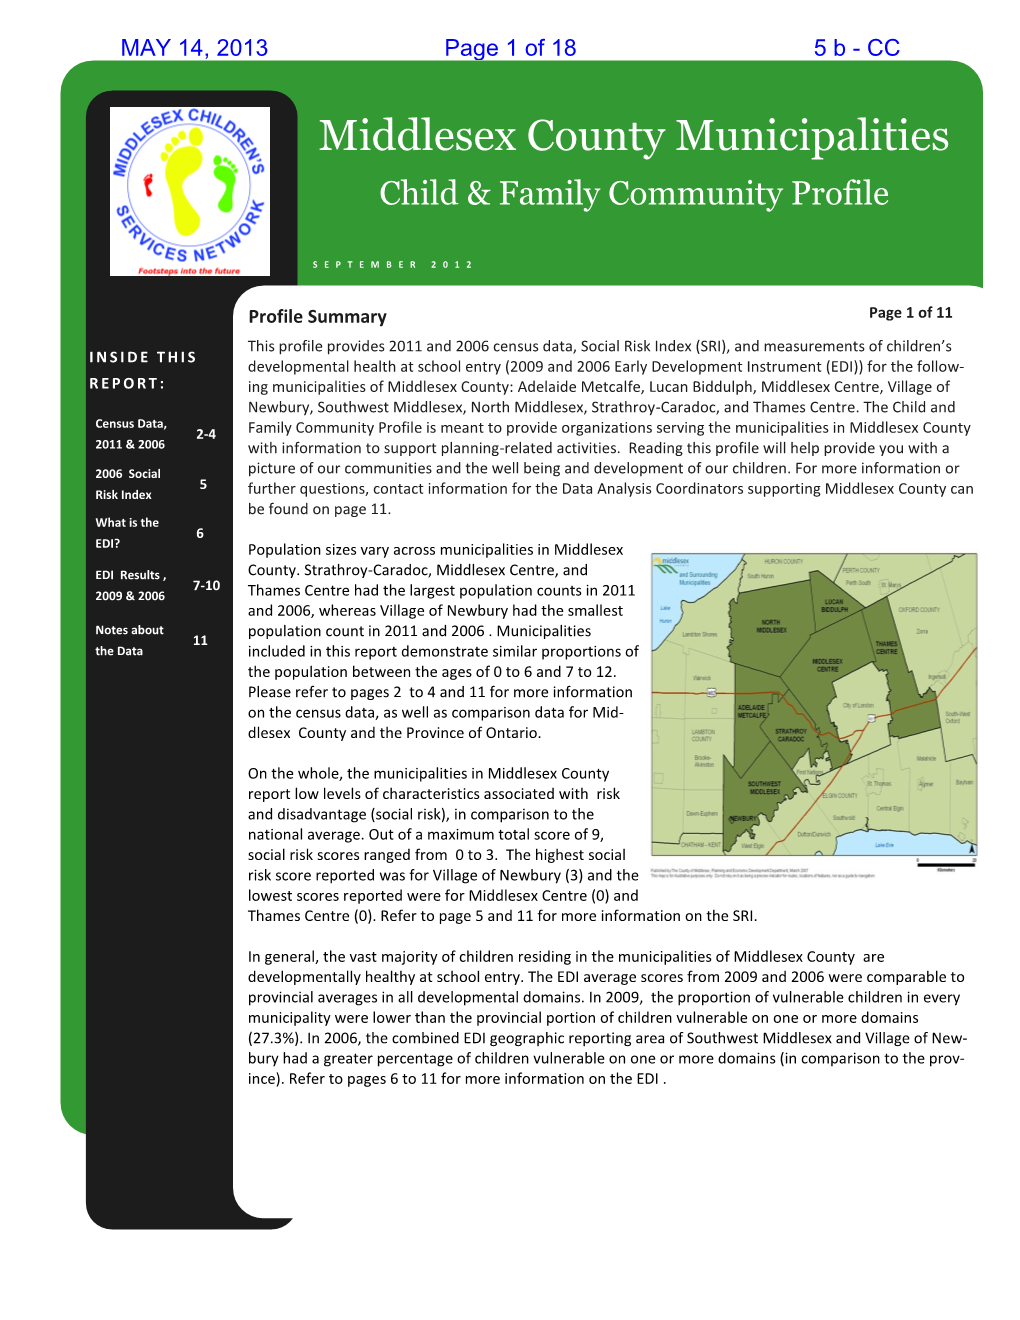 Middlesex County Municipalities Child & Family Community Profile